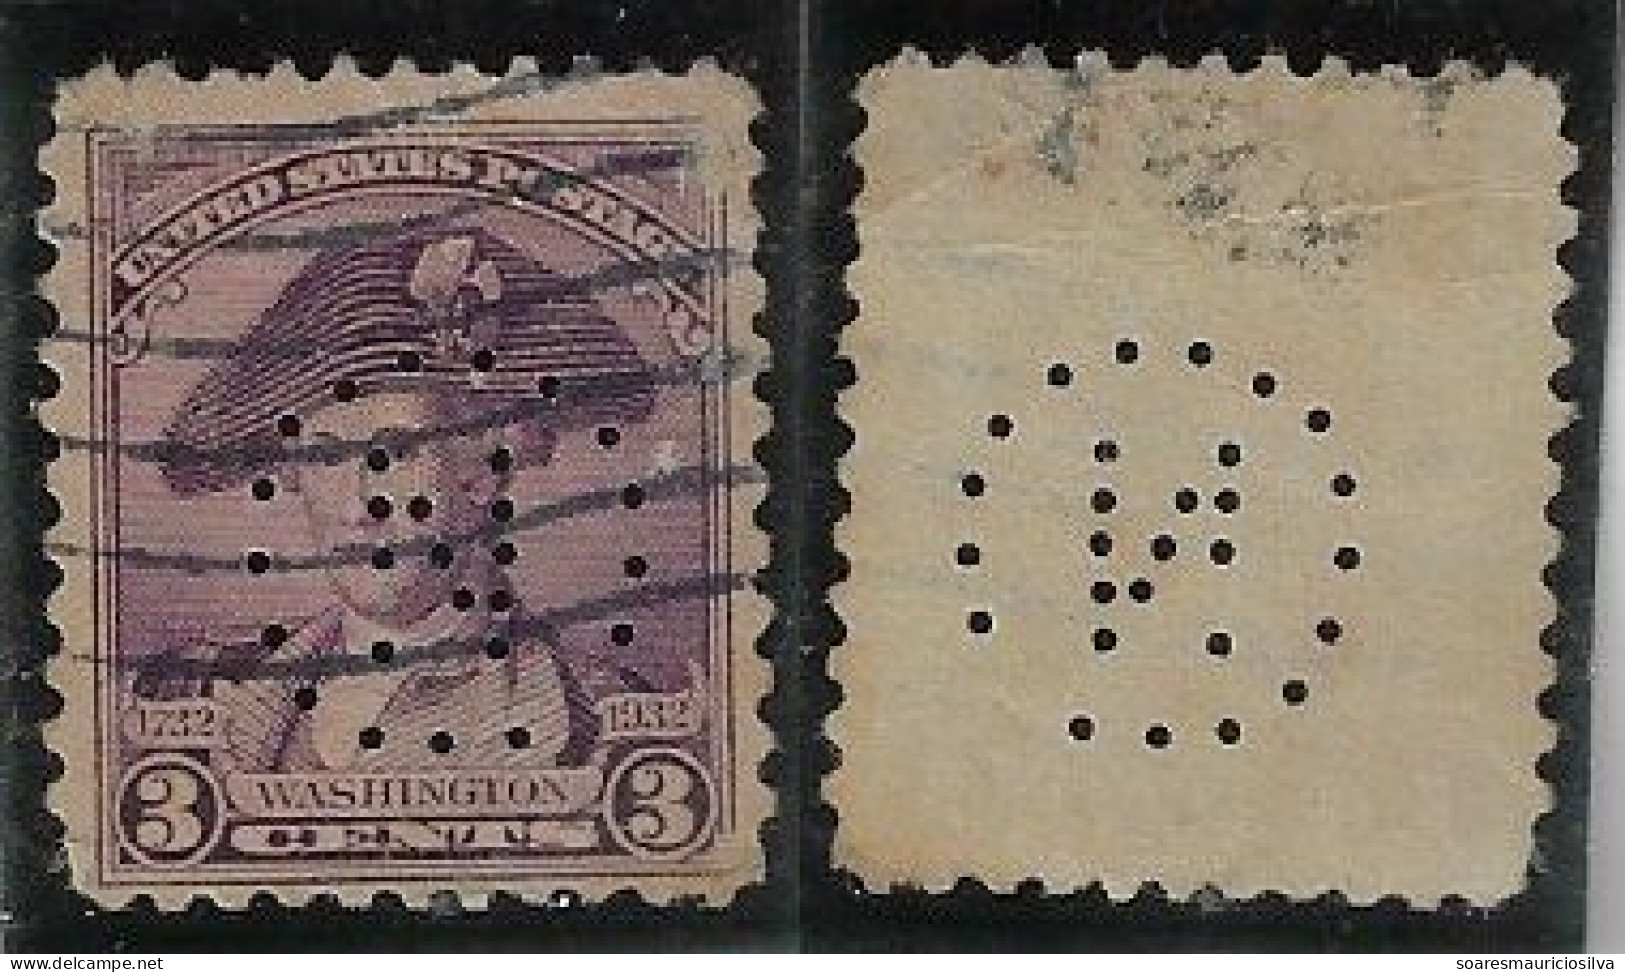 USA United States 1926/1965 Stamp With Perfin N (Circle) By Norton Company From Worcester Lochung Perfore - Perfins